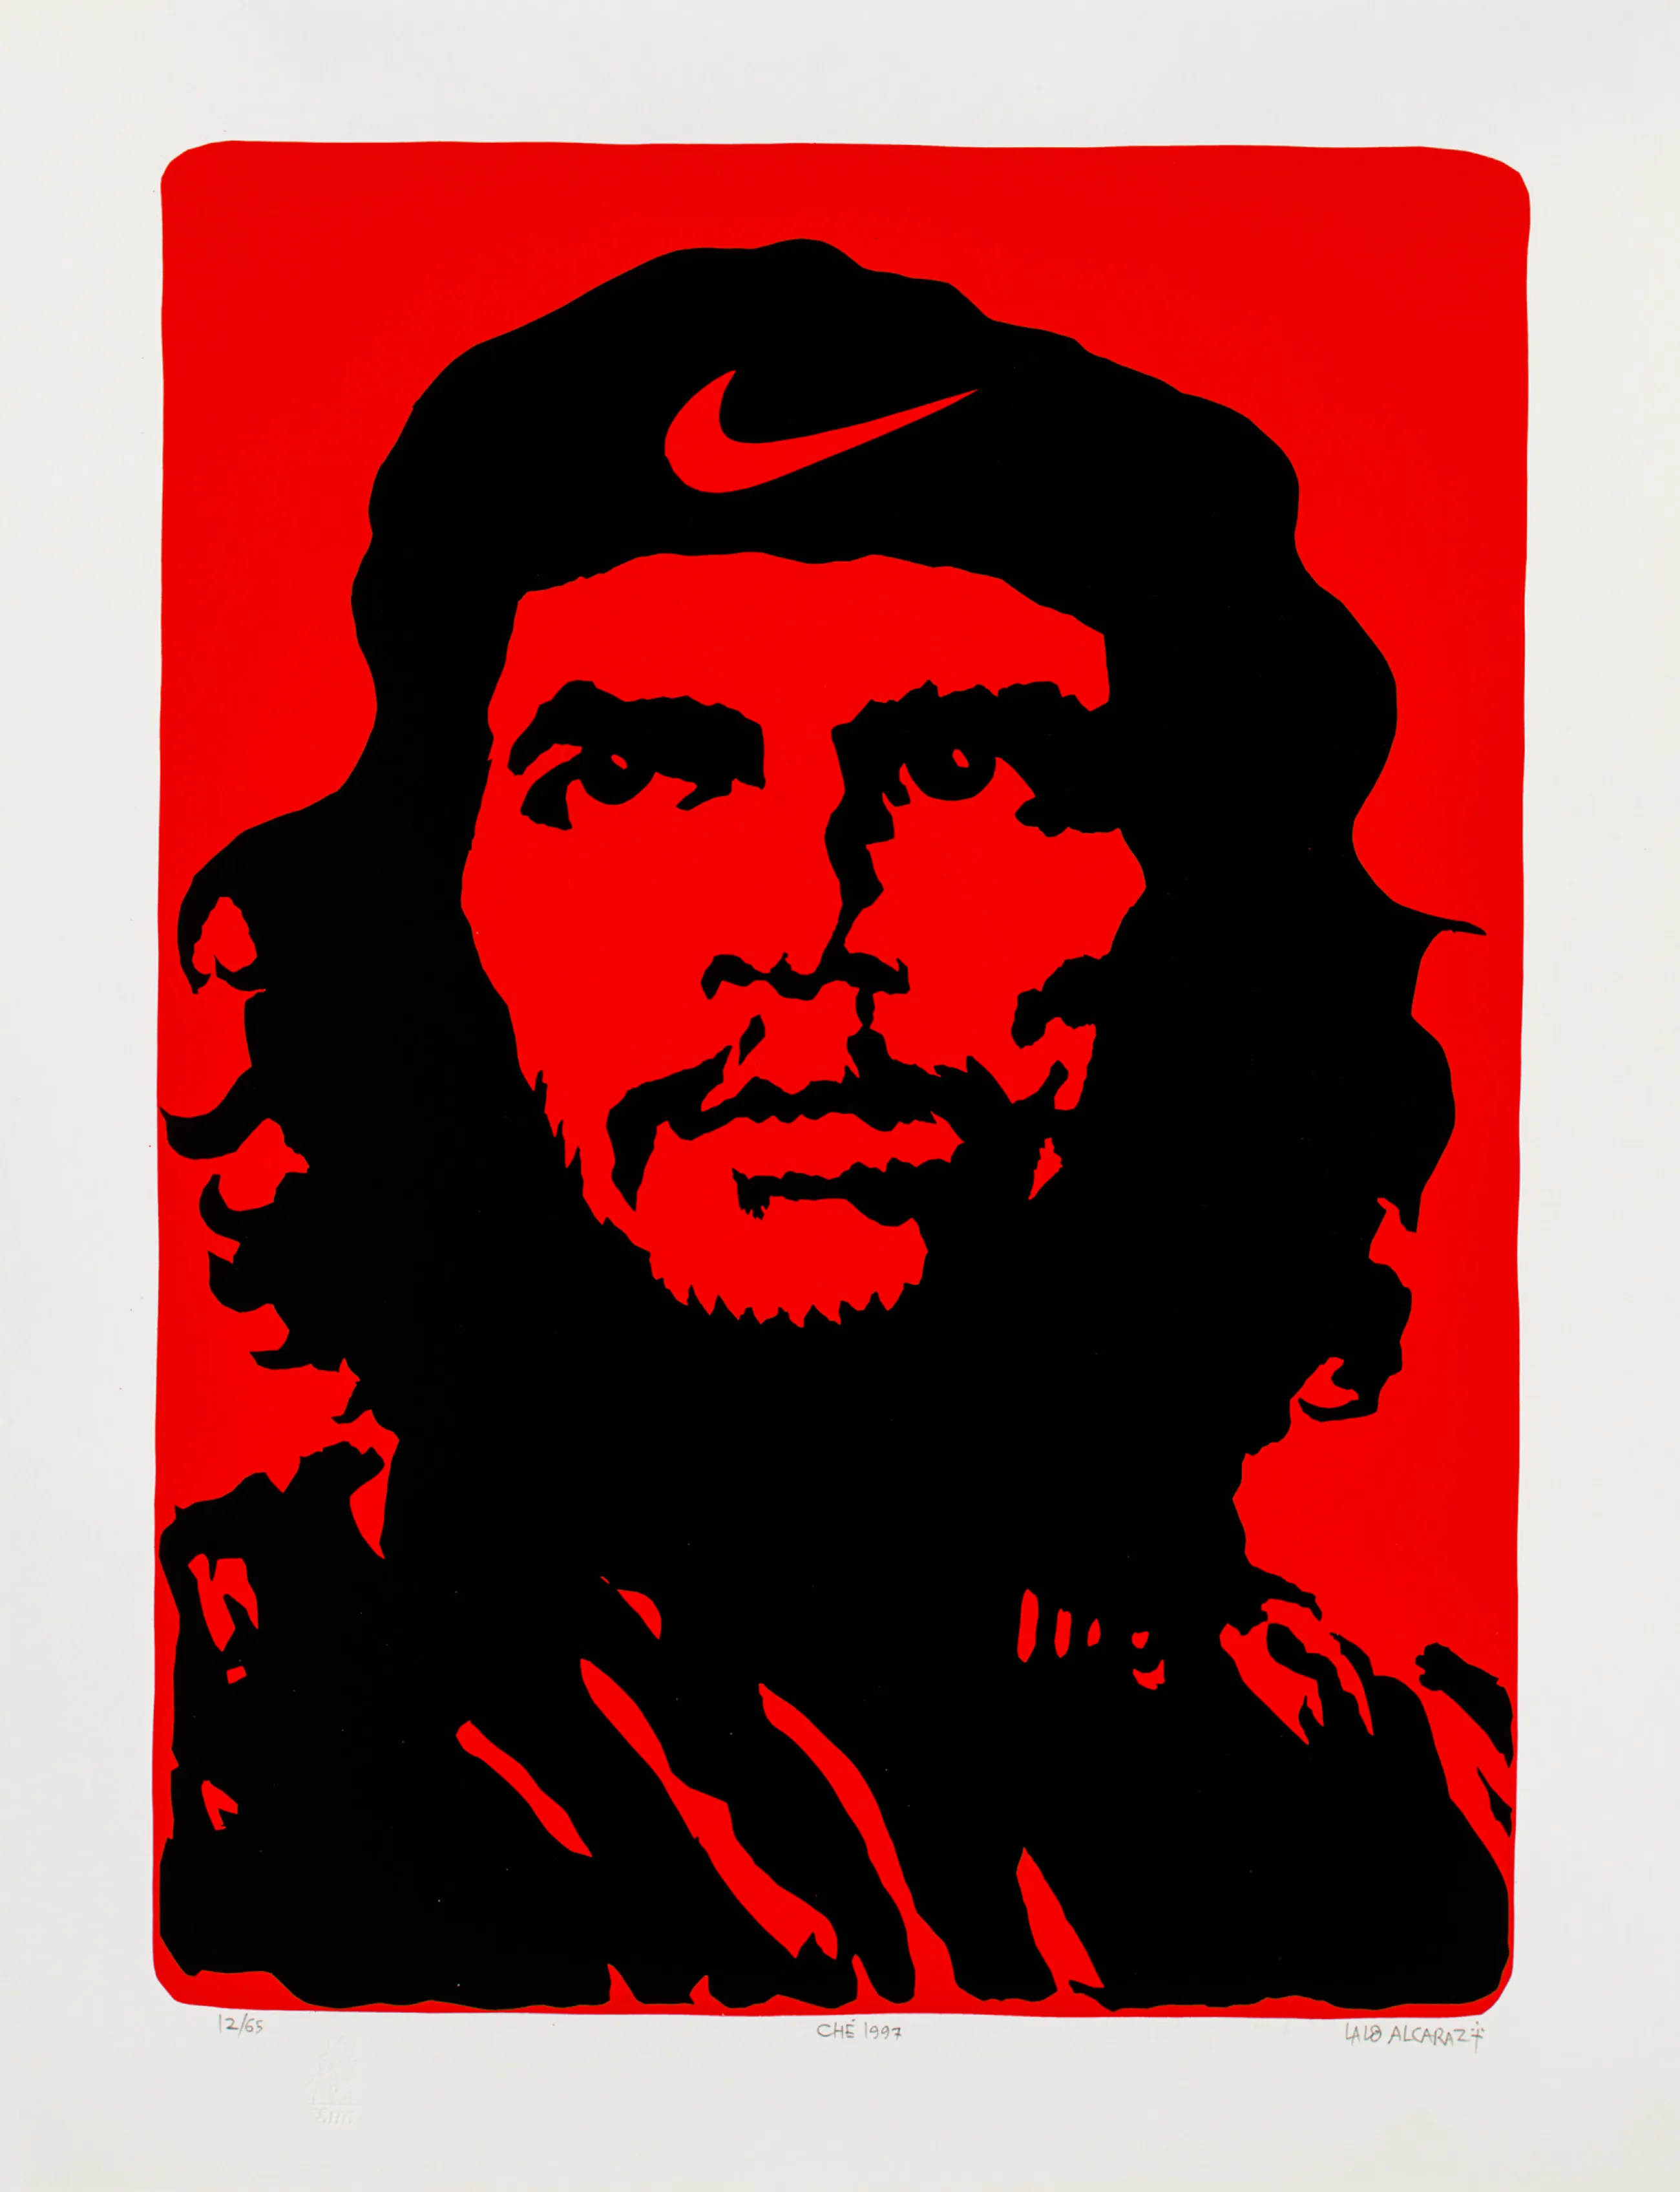 Image: Lalo Alcaraz, Che, 1997, screenprint on paper. Smithsonian Institution collection.